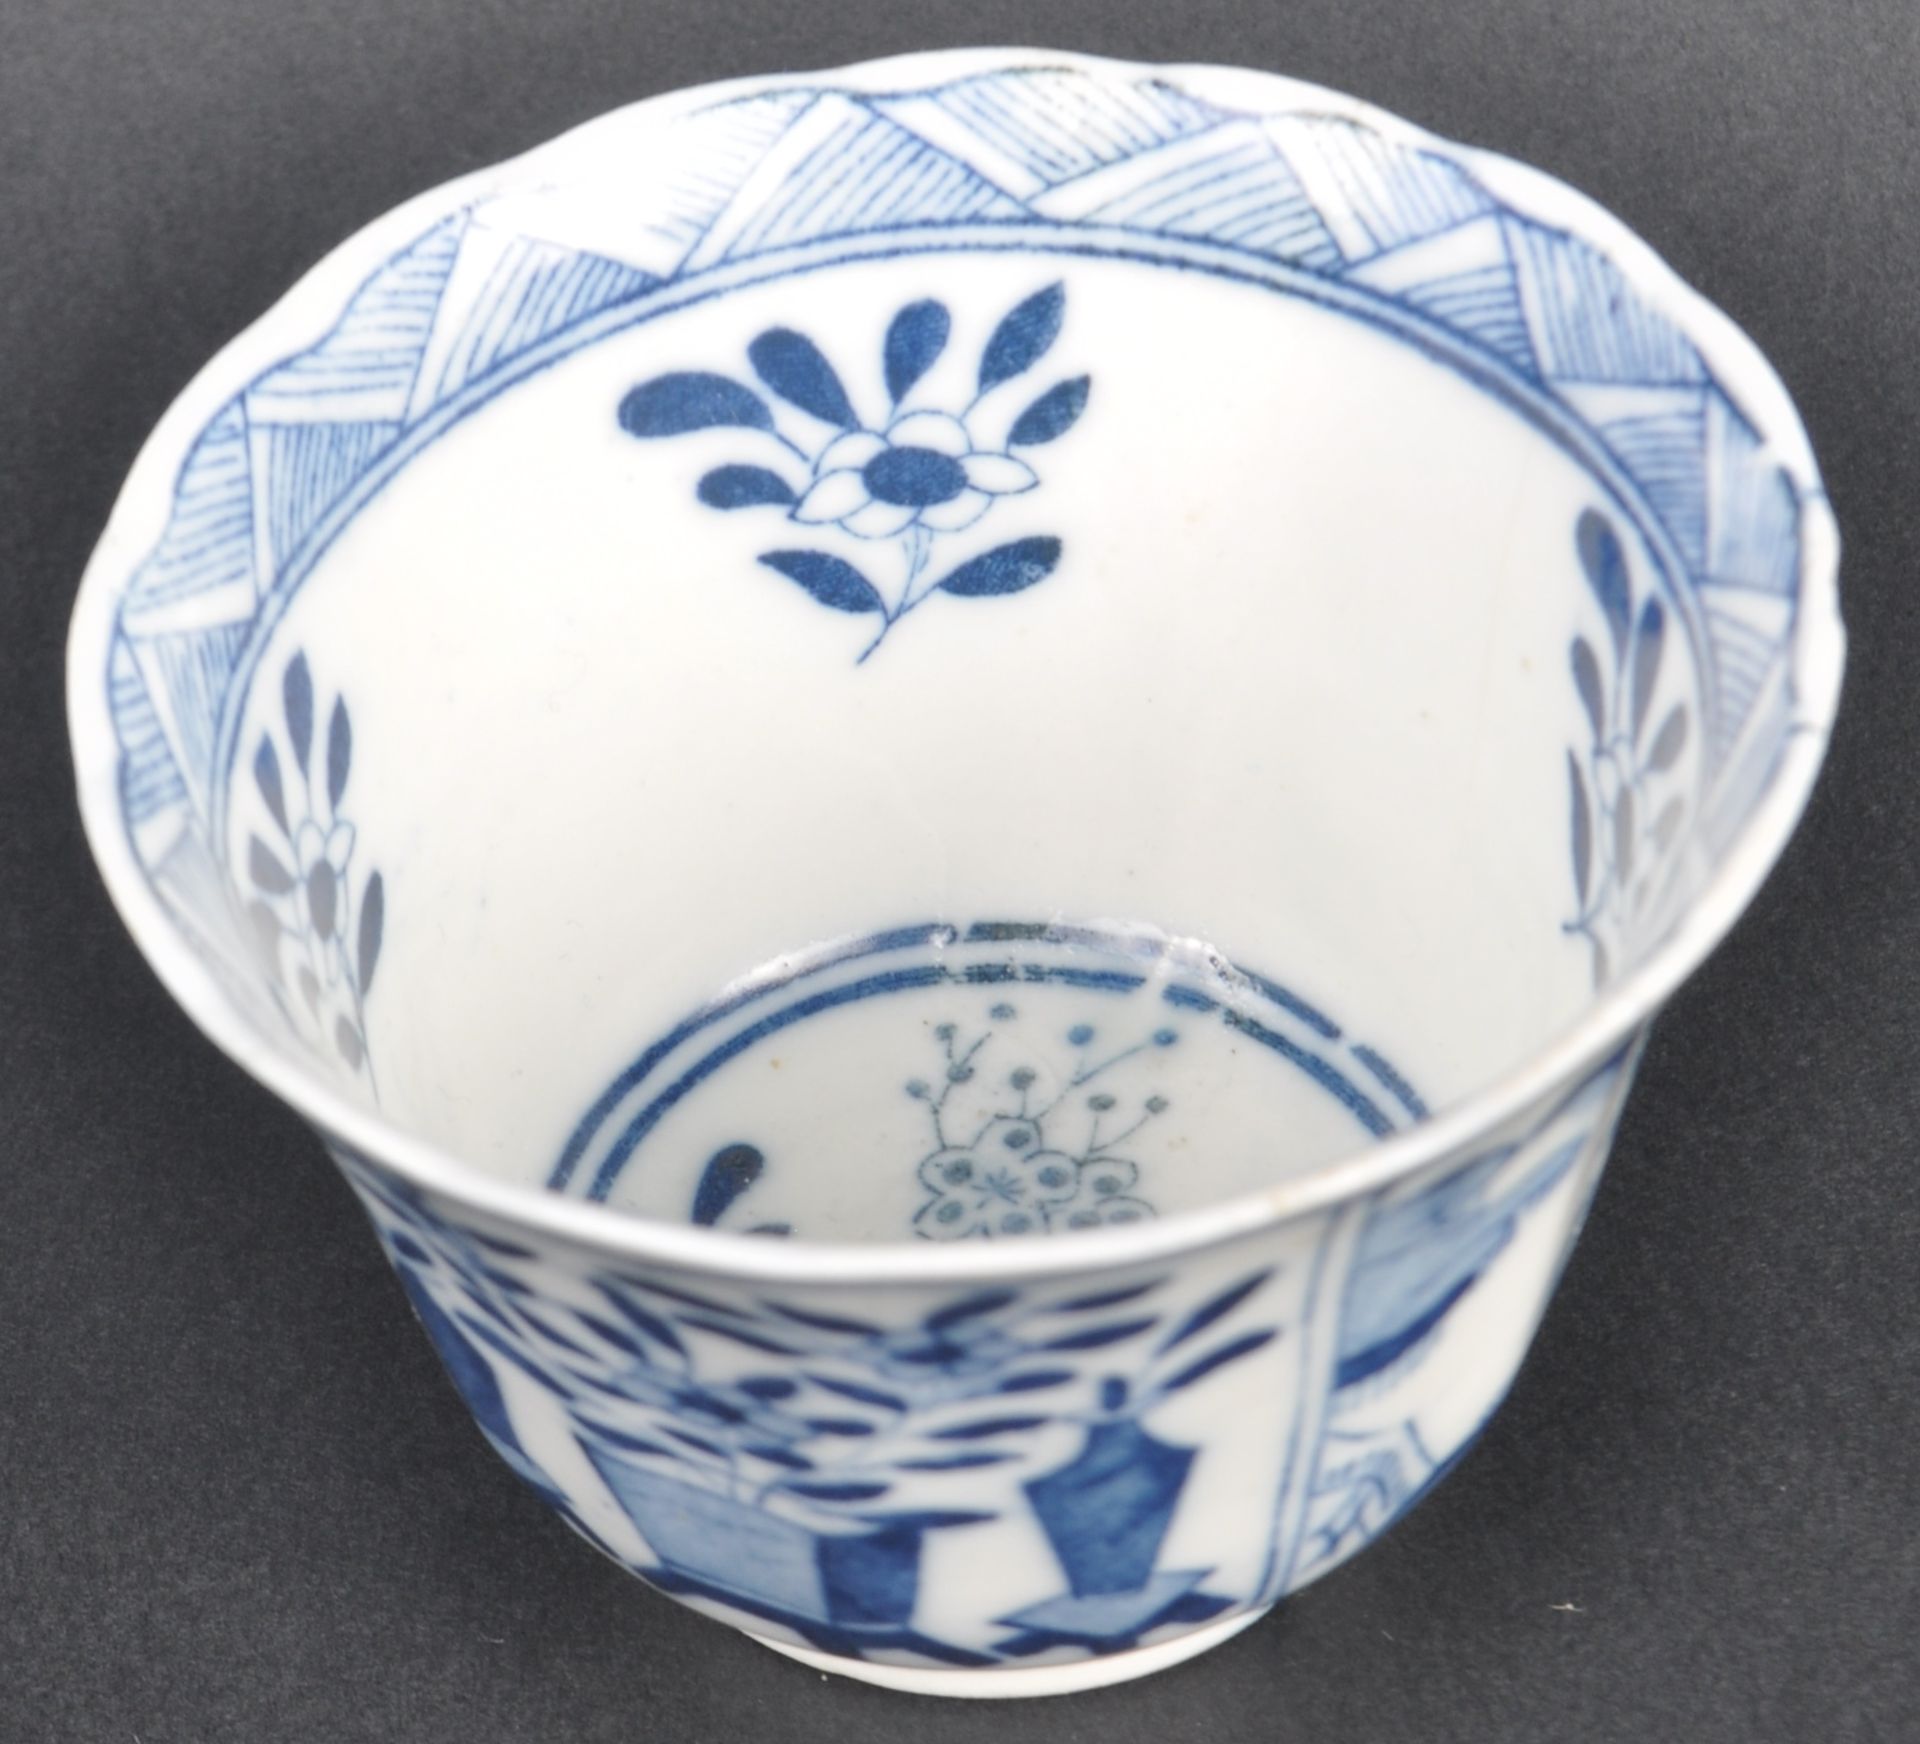 CHINESE XUANTONG BLUE & WHITE PORCELAIN TEA BOWL - Image 3 of 5